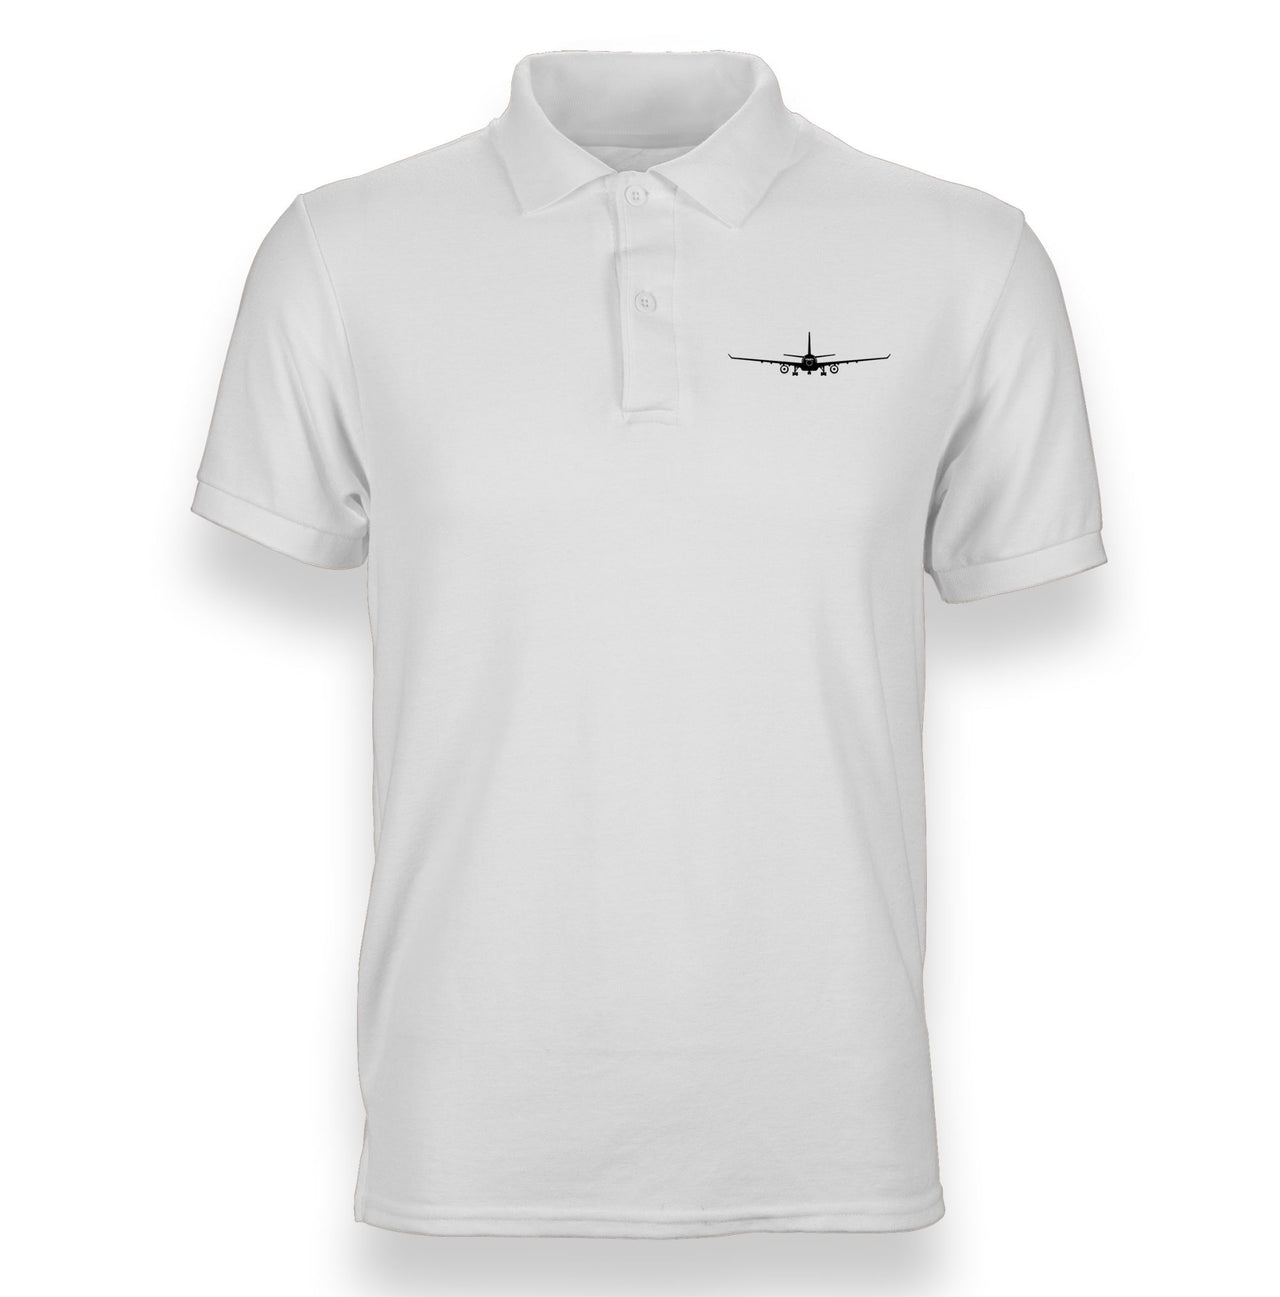 Airbus A330 Silhouette Designed "WOMEN" Polo T-Shirts